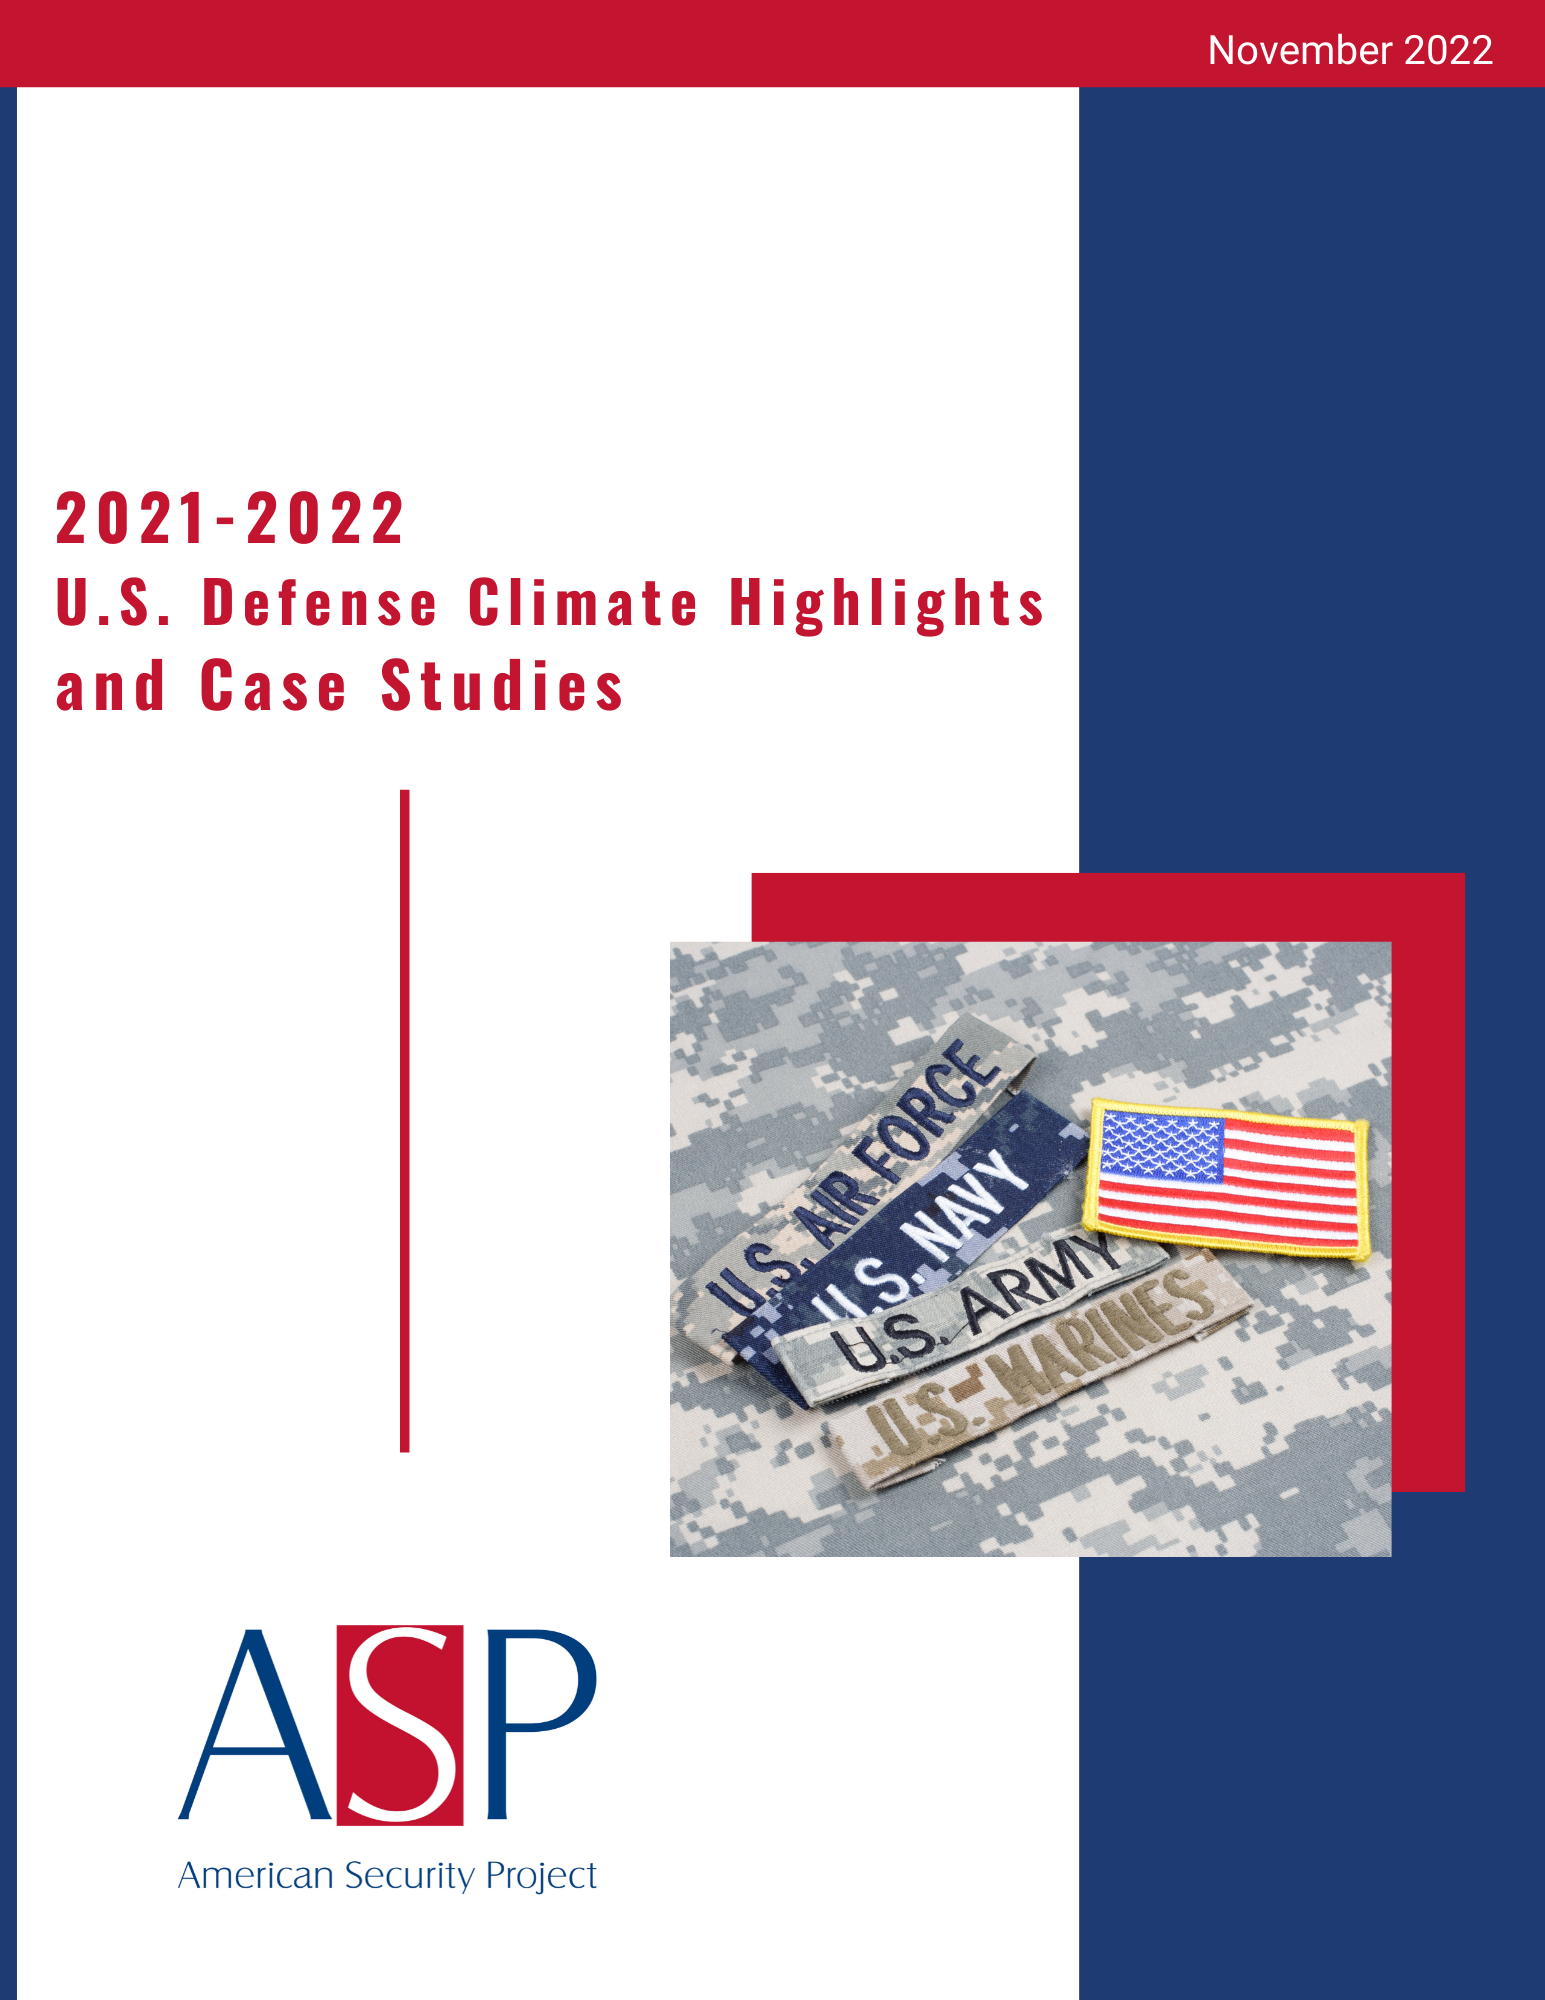 Policy Review – 2021-2022 U.S. Defense Climate Highlights